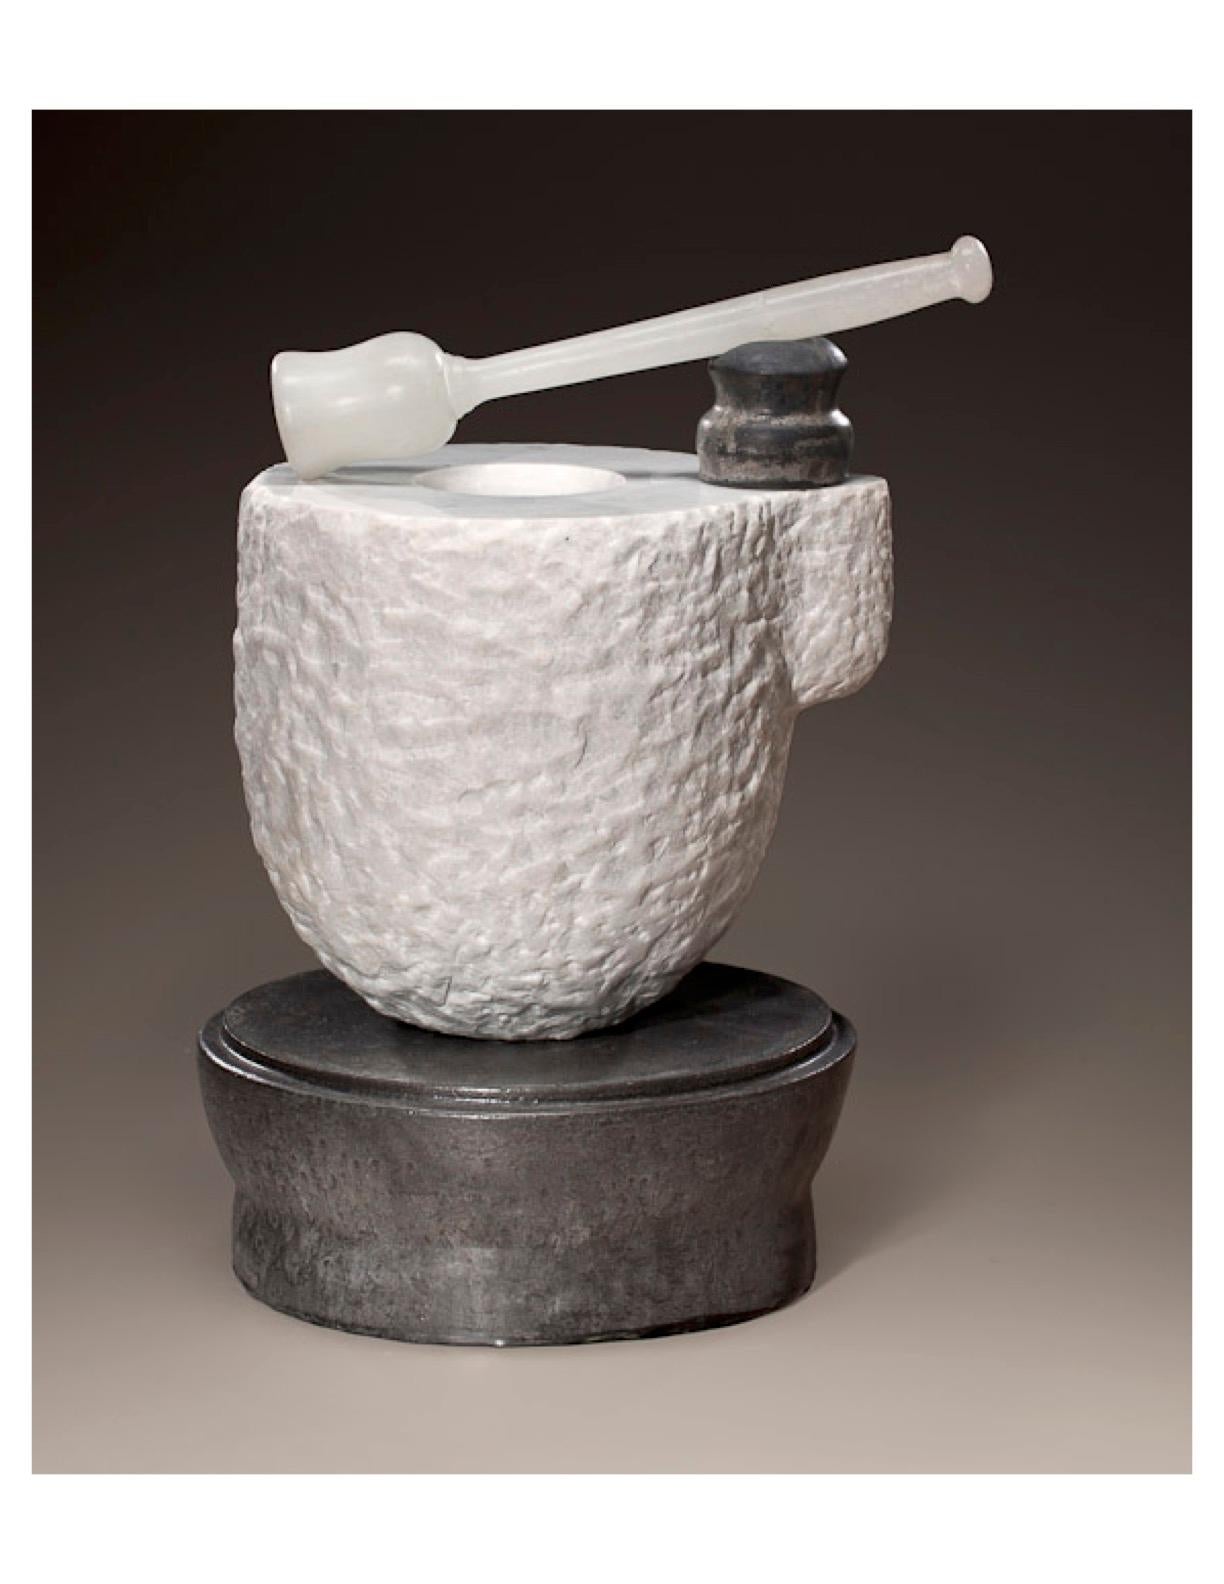 Modern Richard Hirsch White Marble Mortar and Glass Pestle Sculpture, 2006 - 2010 For Sale